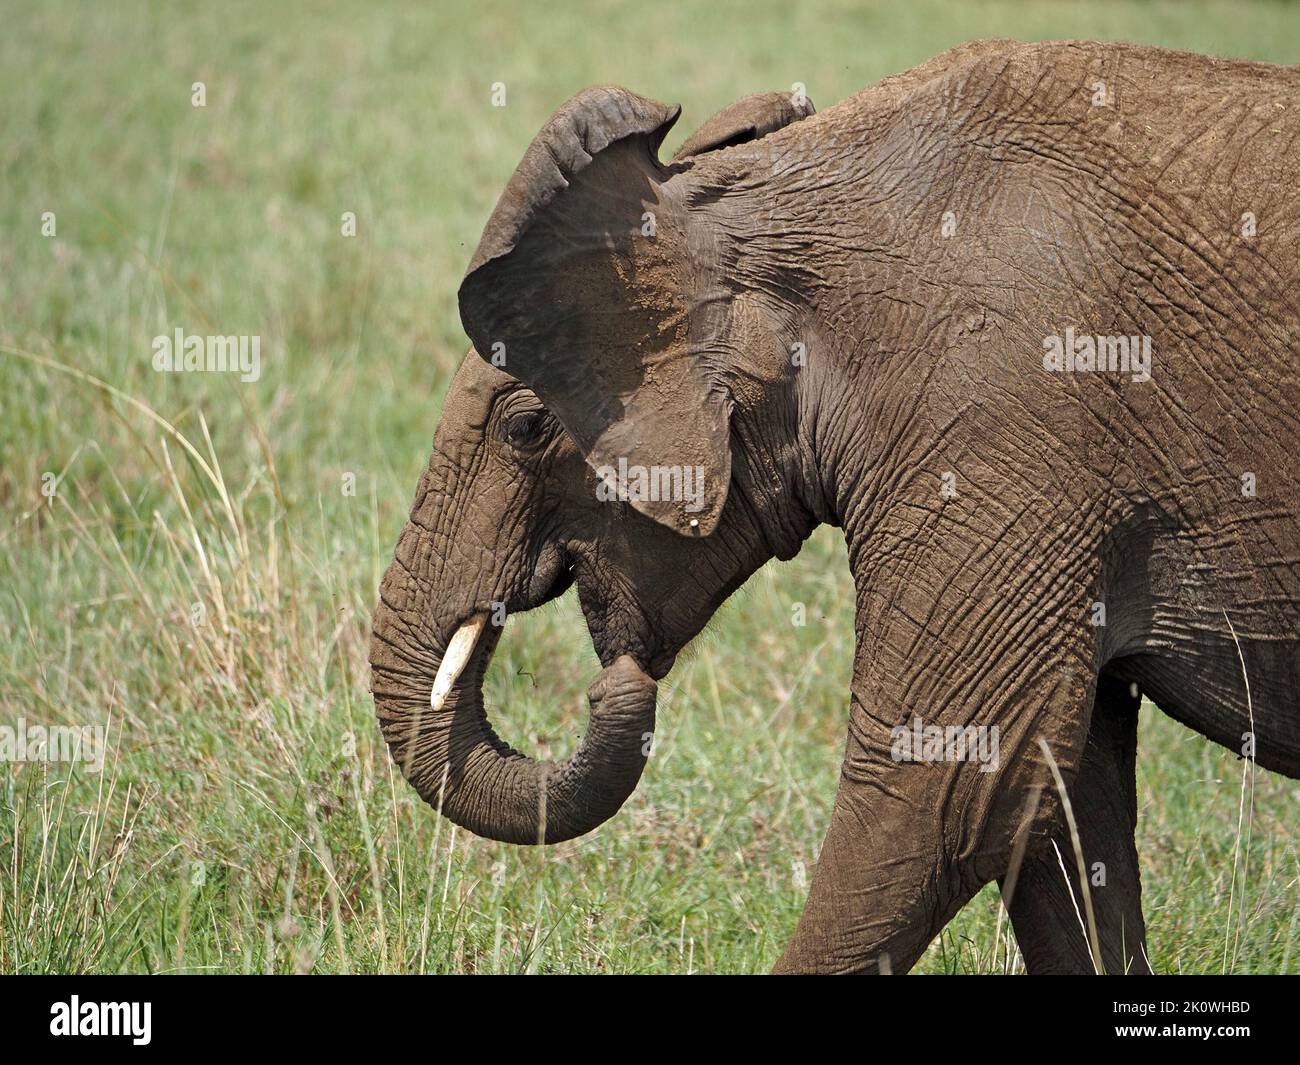 young African elephant (Loxodonta africana) with small tusk & loose wrinkly skin flapping ears feeding with trunk - Masai Mara grasslands Kenya,Africa Stock Photo